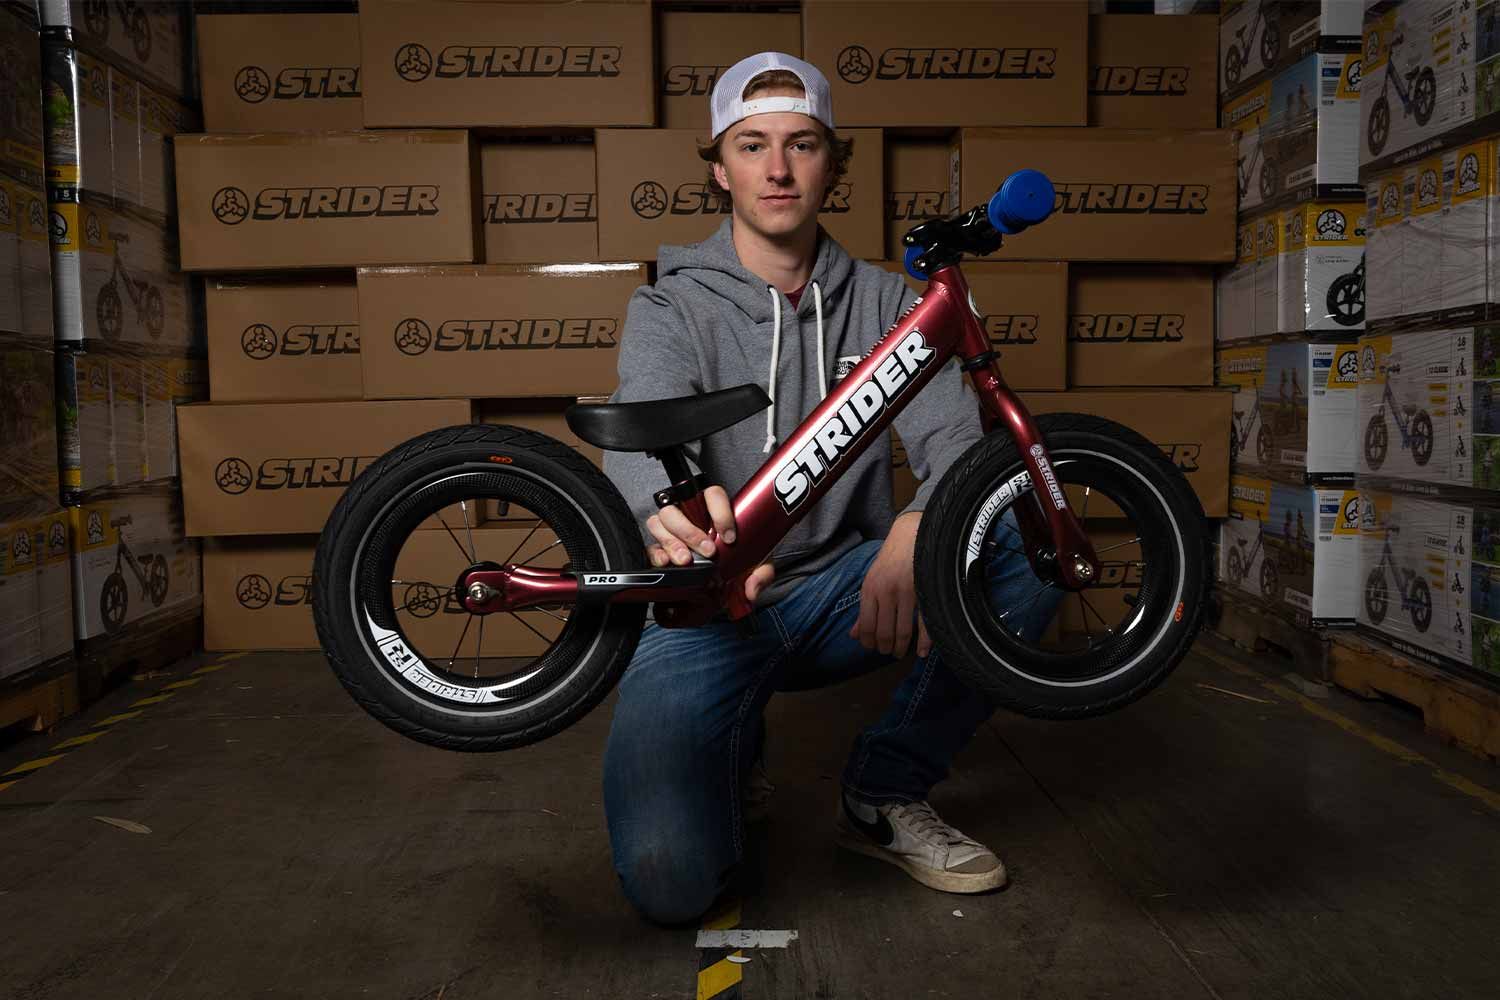 Bode McFarland poses with Strider Rider 1 - Race Edition balance bike in the Strider warehouse